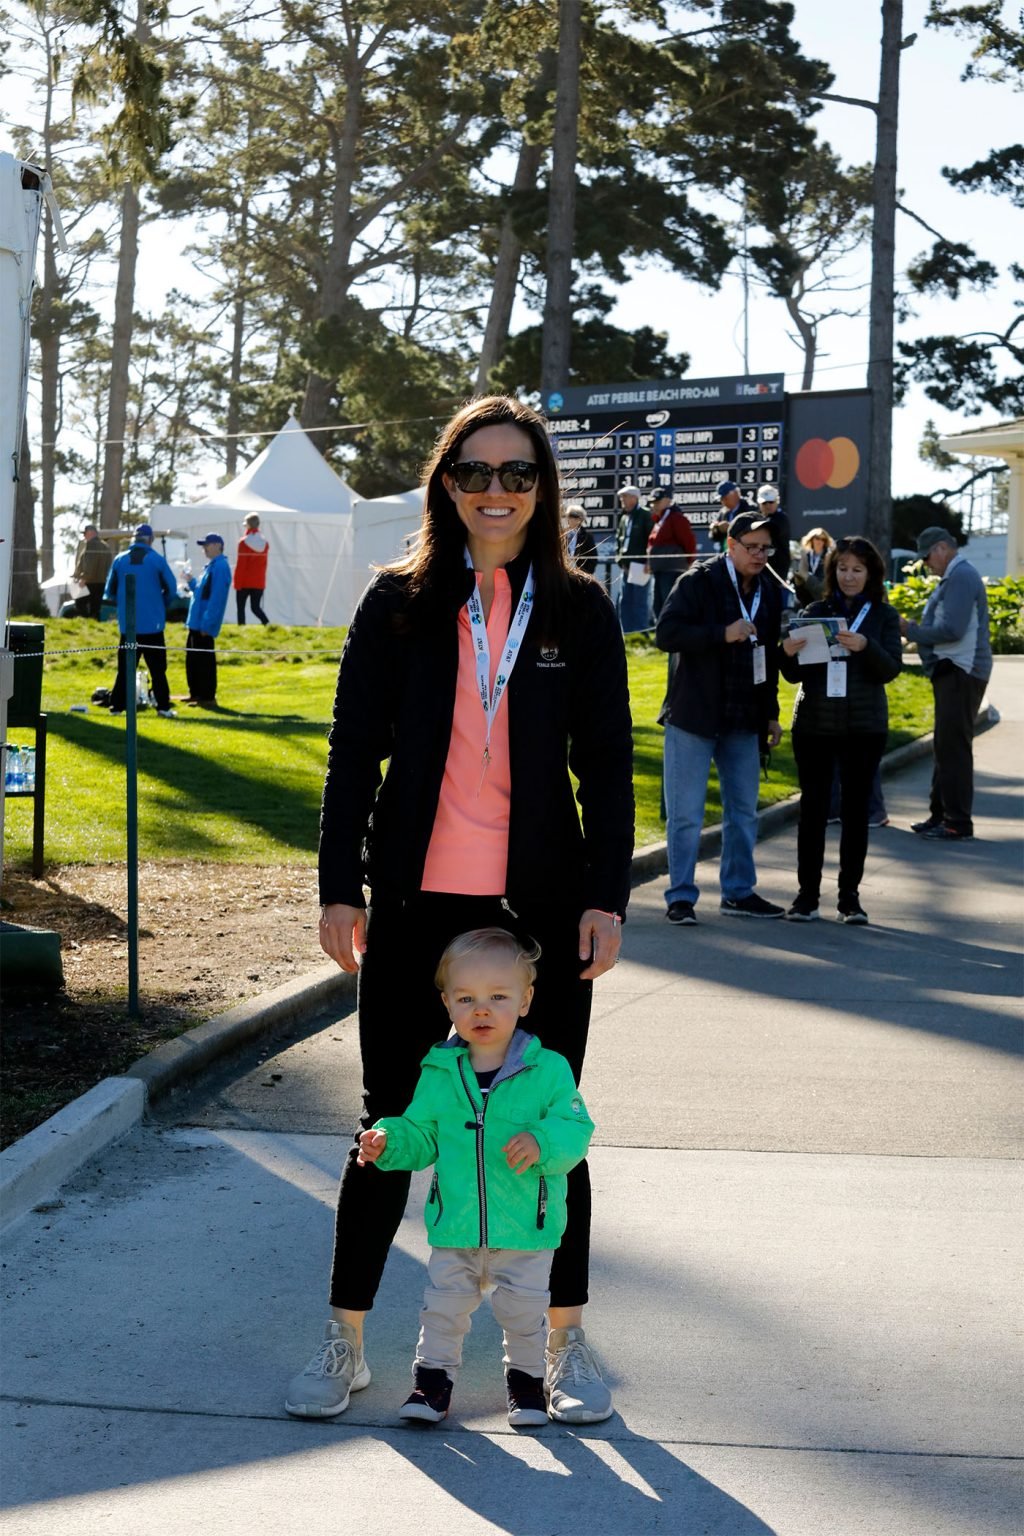 Fans at the 2020 AT&T Pebble Beach Pro-Am